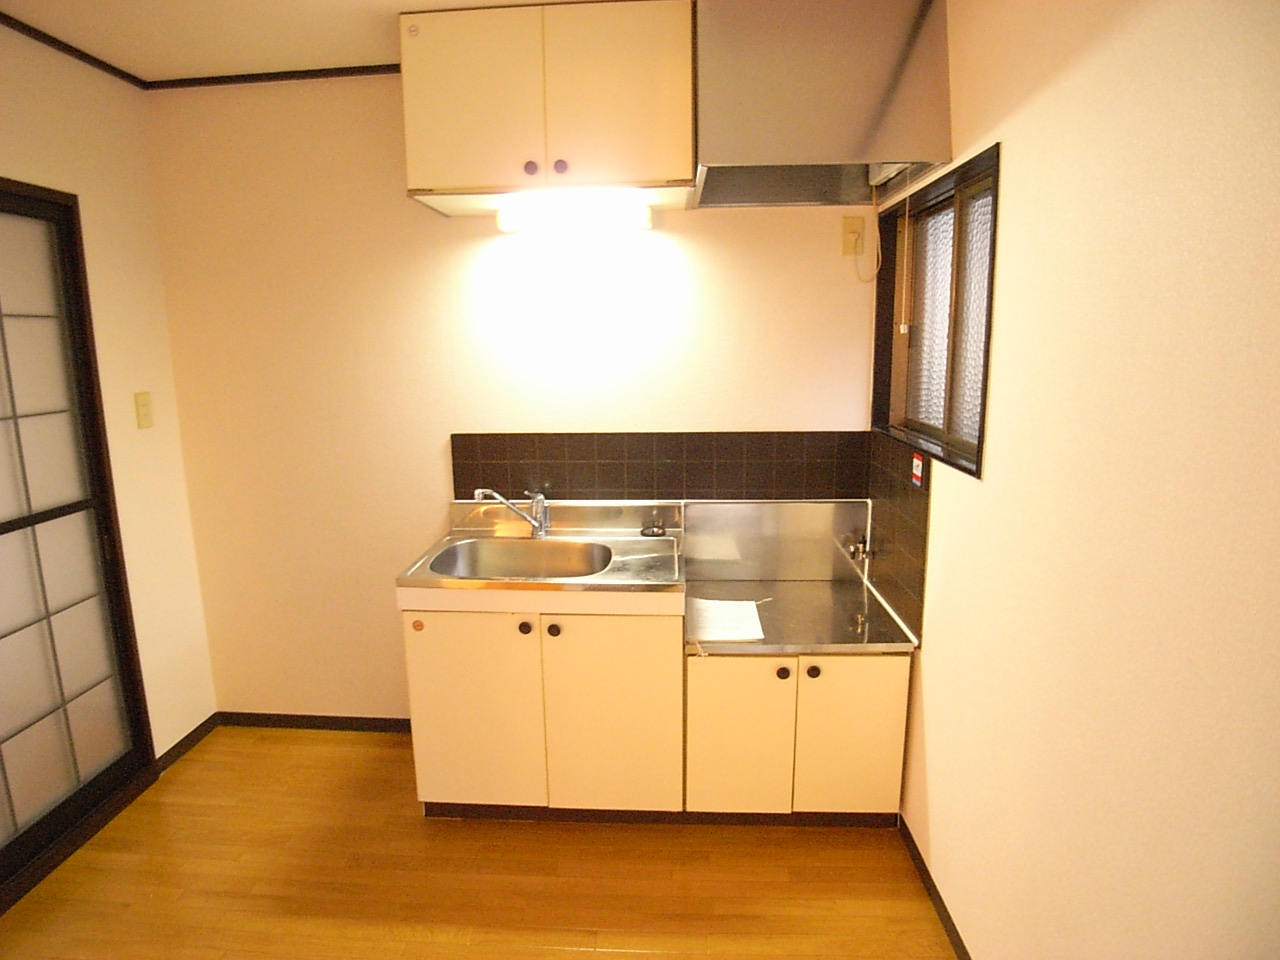 Kitchen. Two-neck is a stove installation Allowed. Pasta You can also Easy Cooking